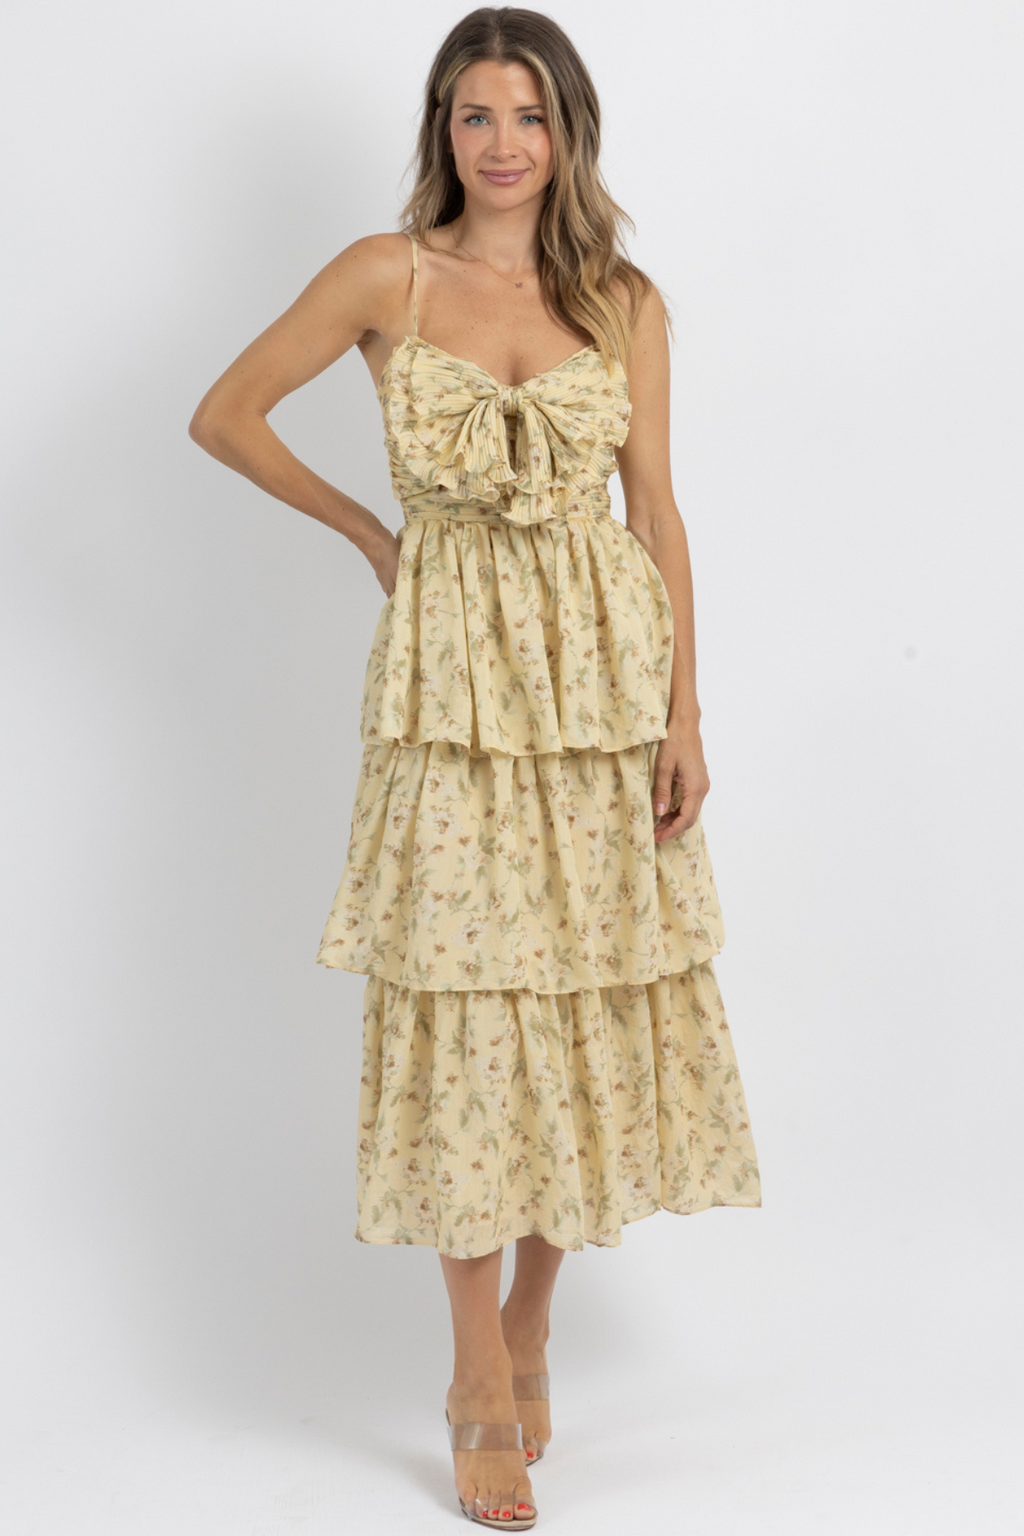 YOURS TRULY TIERED MIDI DRESS